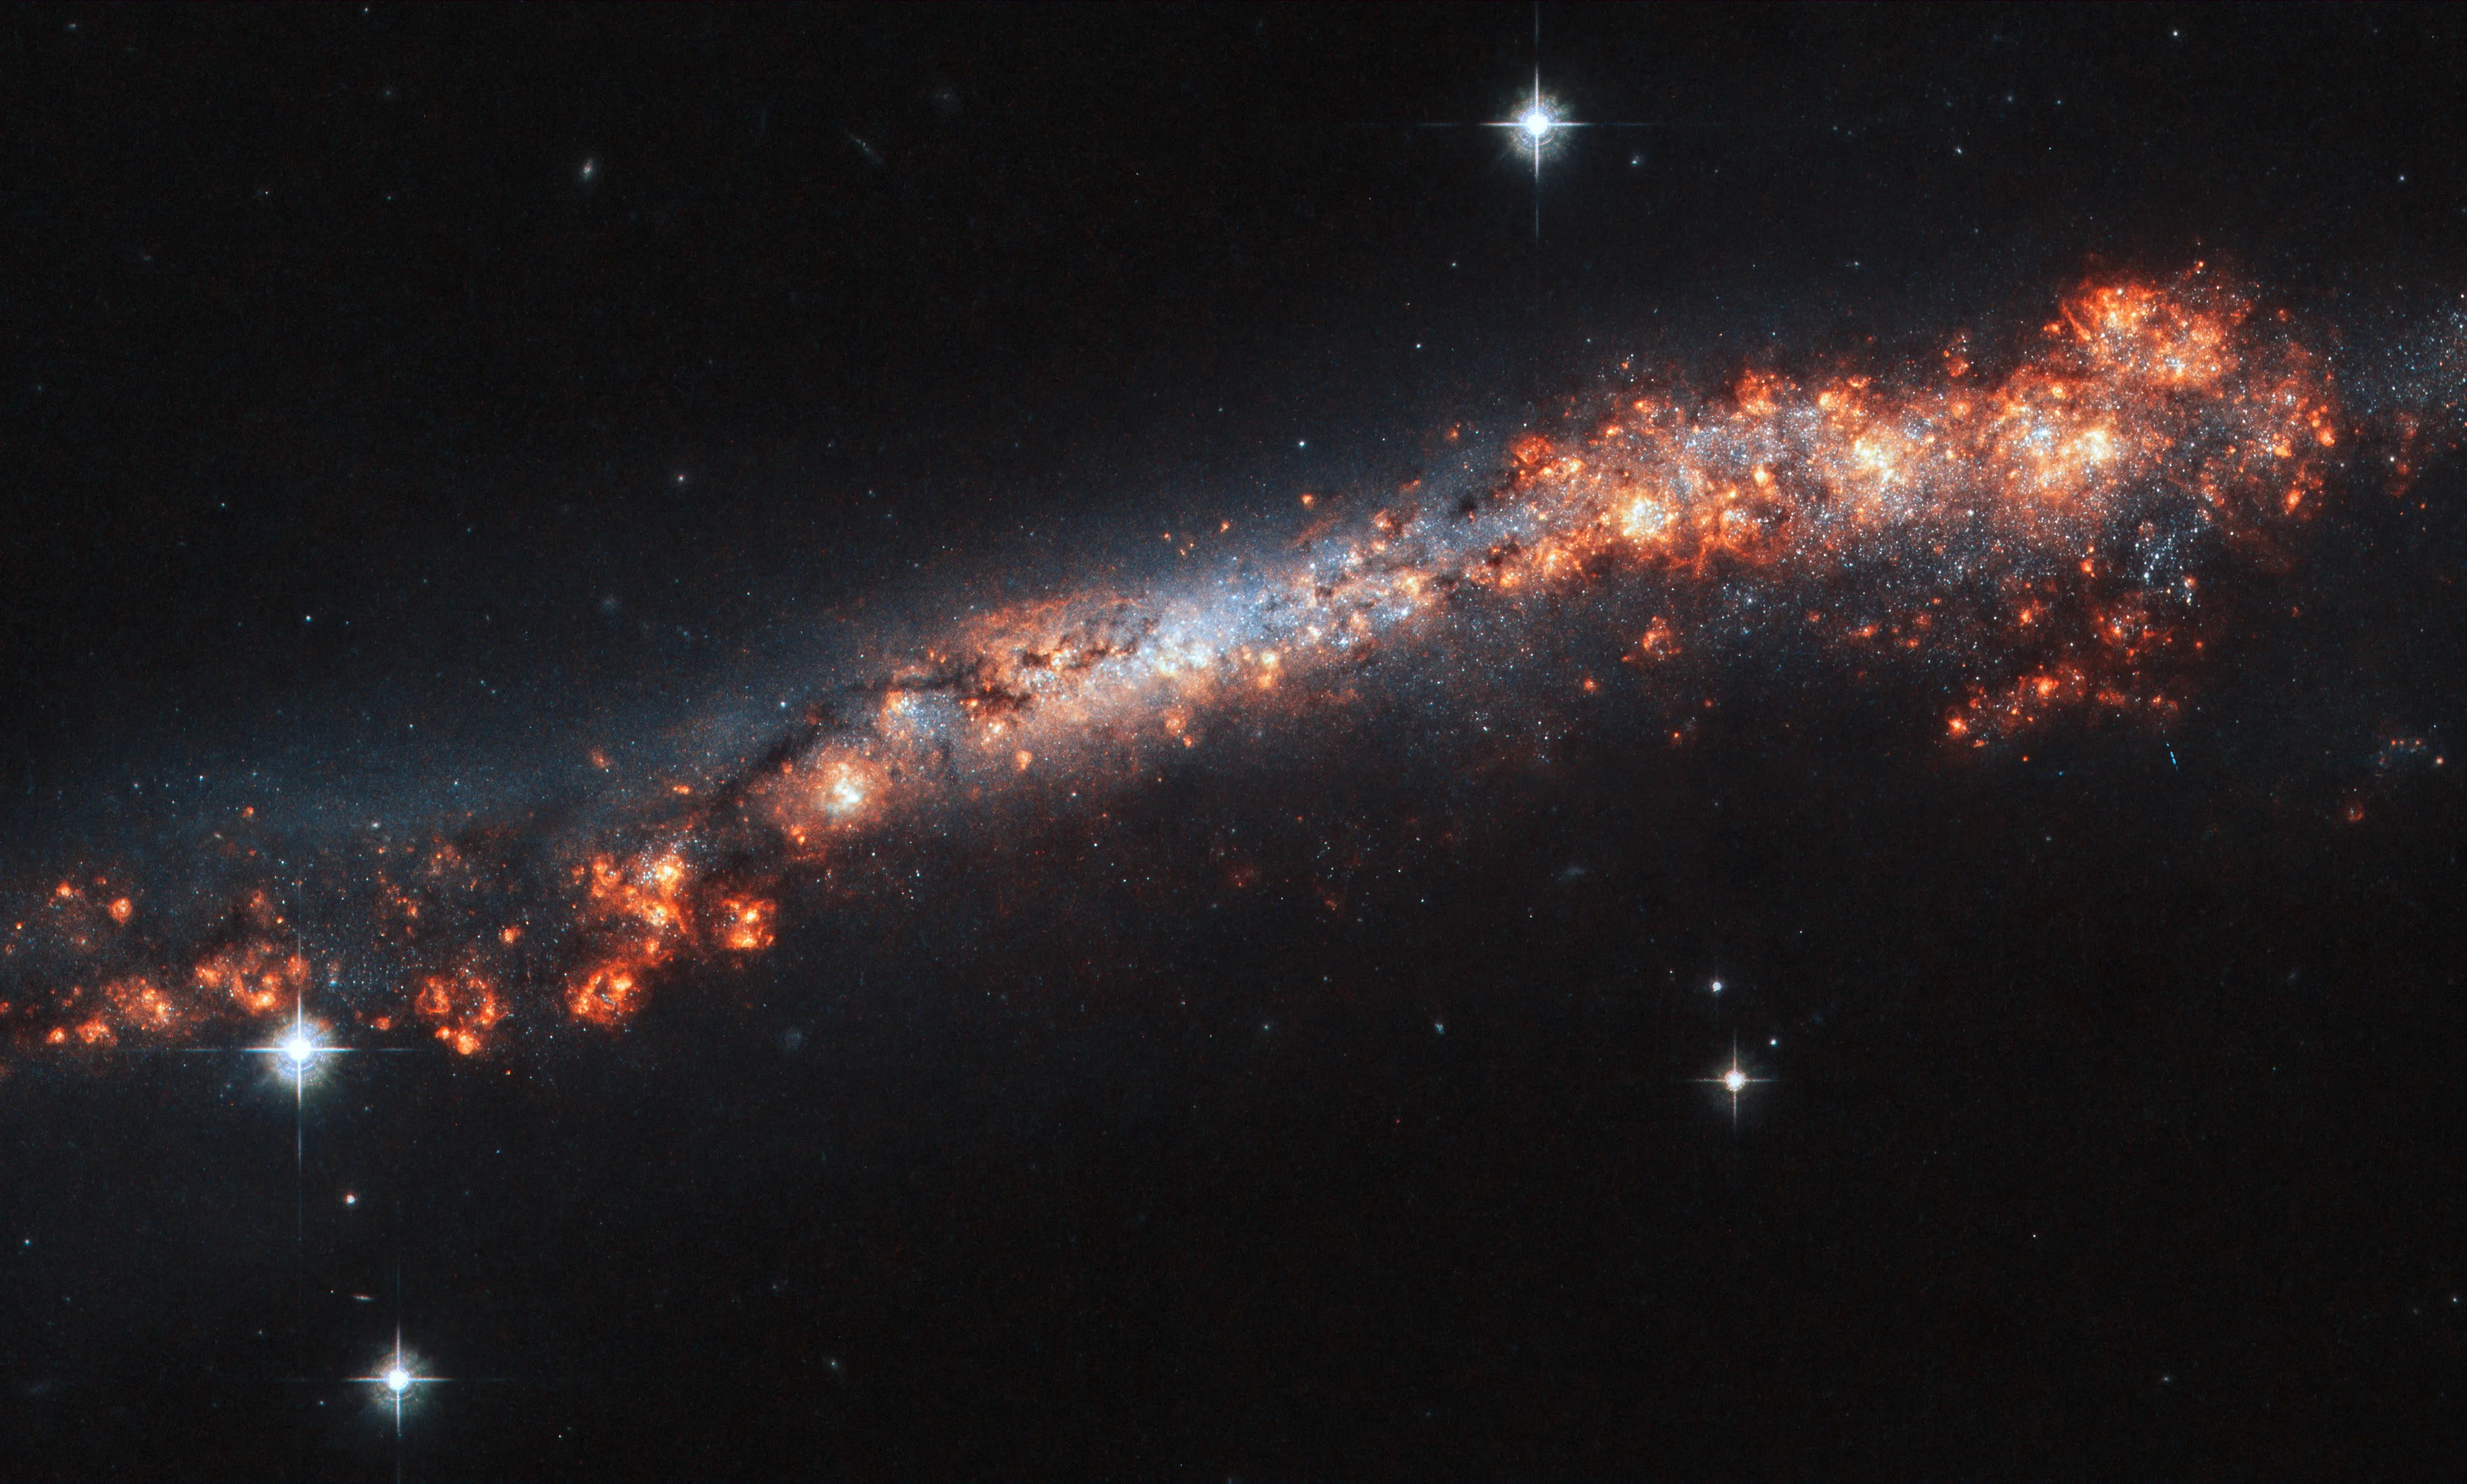 Ngc 3432 spiral galaxy, as seen by hubble